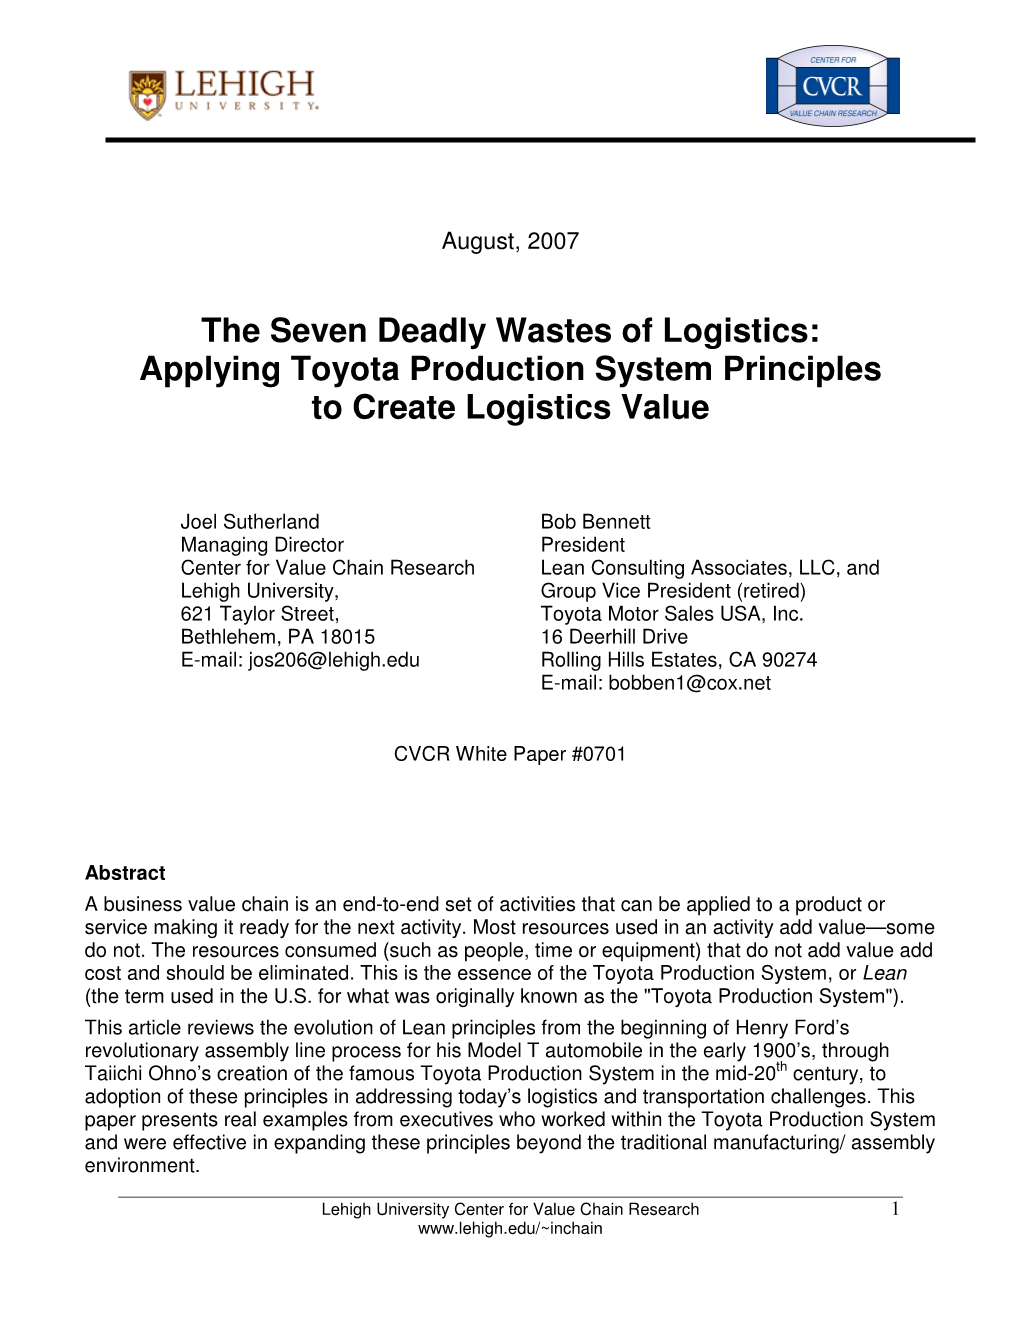 The Seven Deadly Wastes of Logistics: Applying Toyota Production System Principles to Create Logistics Value